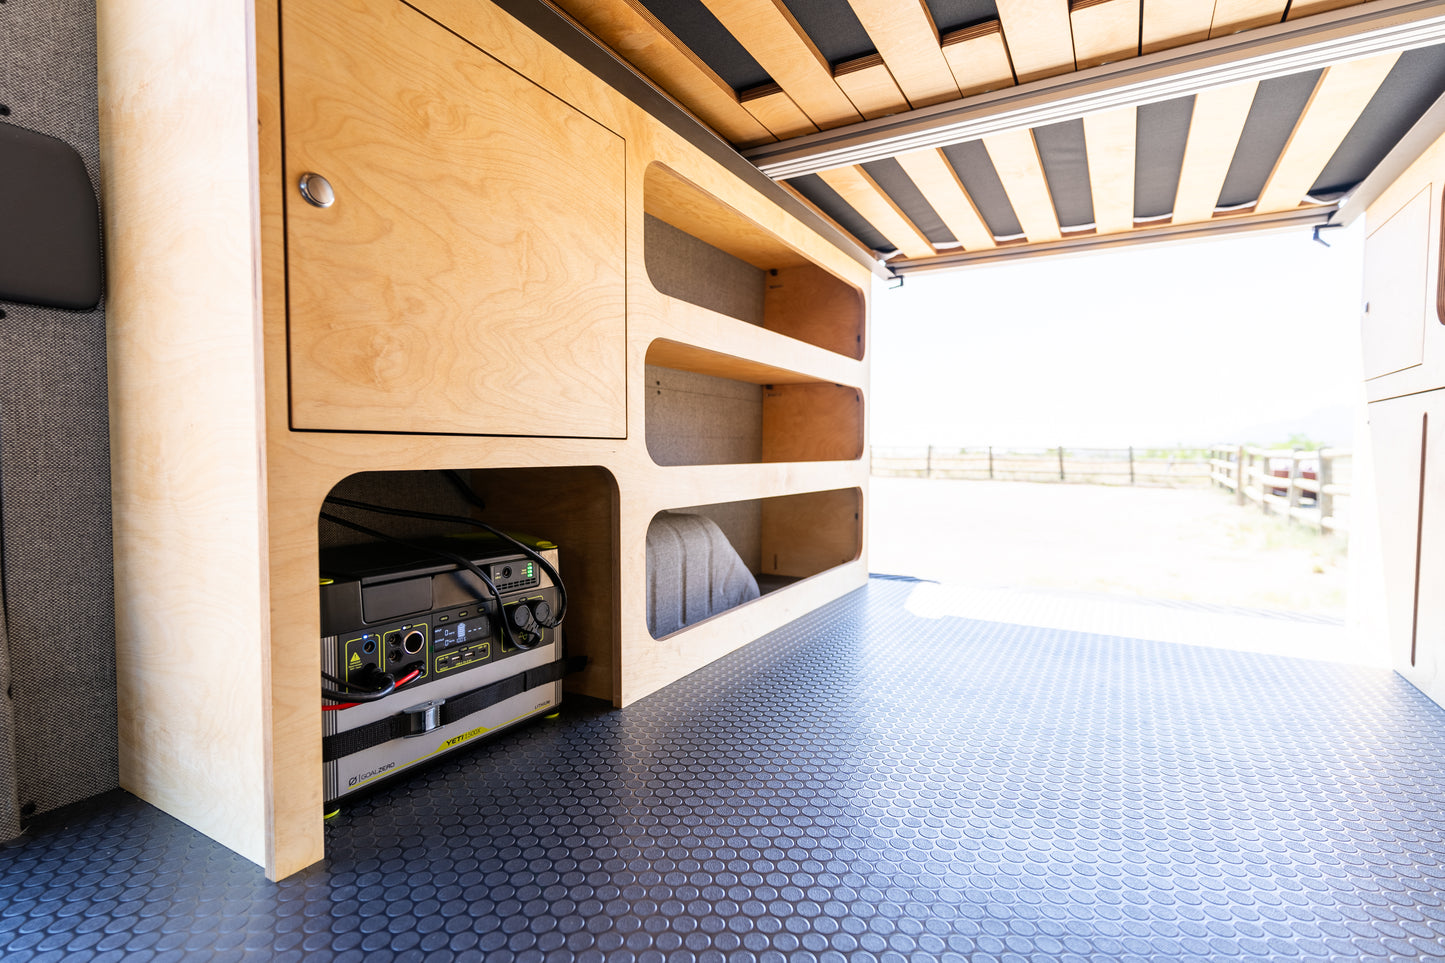 Bed and Wheel Well Cabinets for Transit Vans